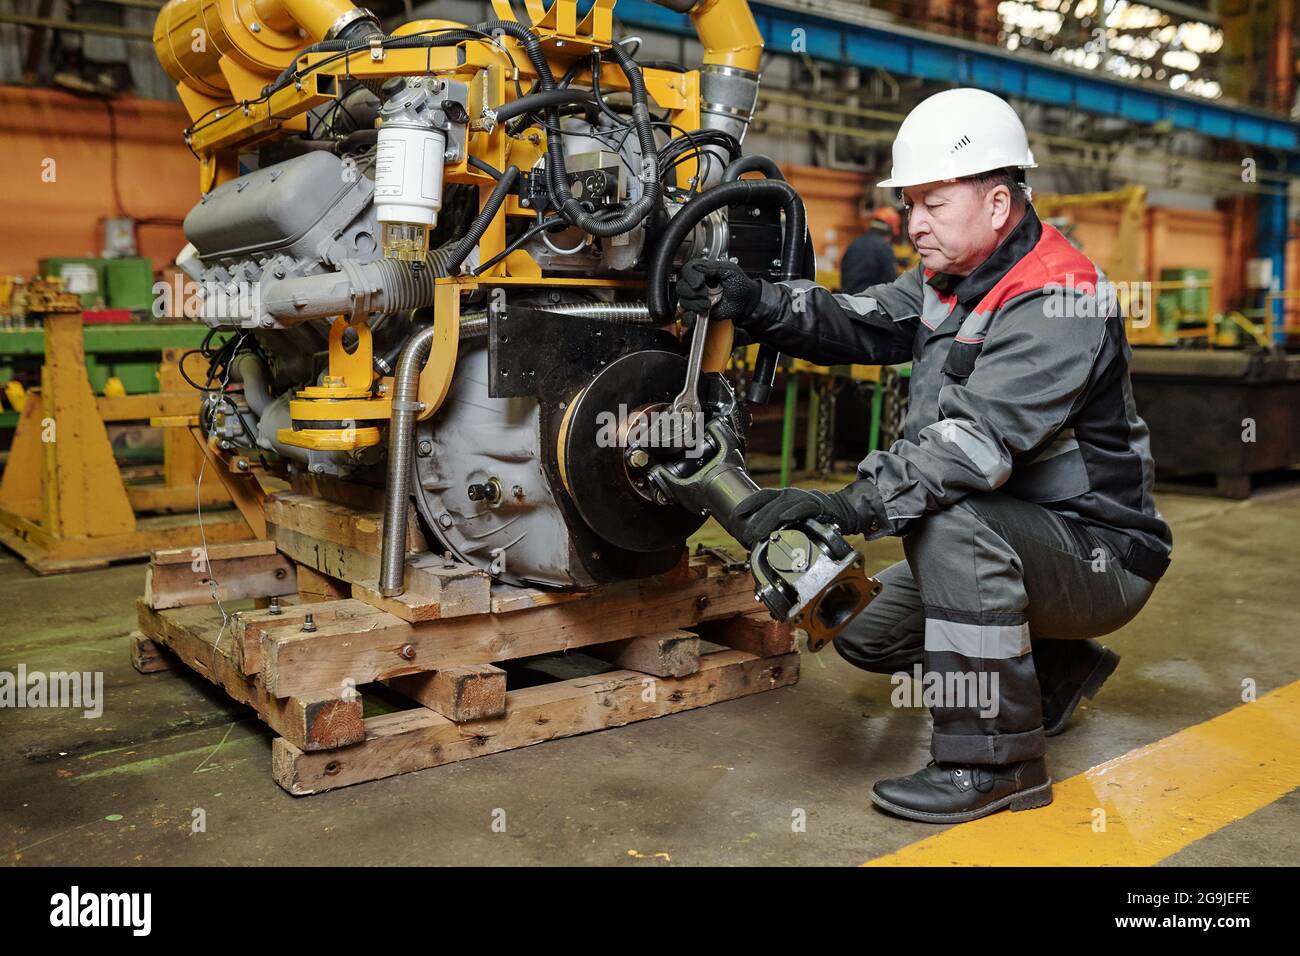 Manual worker in helmet examining the metal equipment in the machinery factory Stock Photo